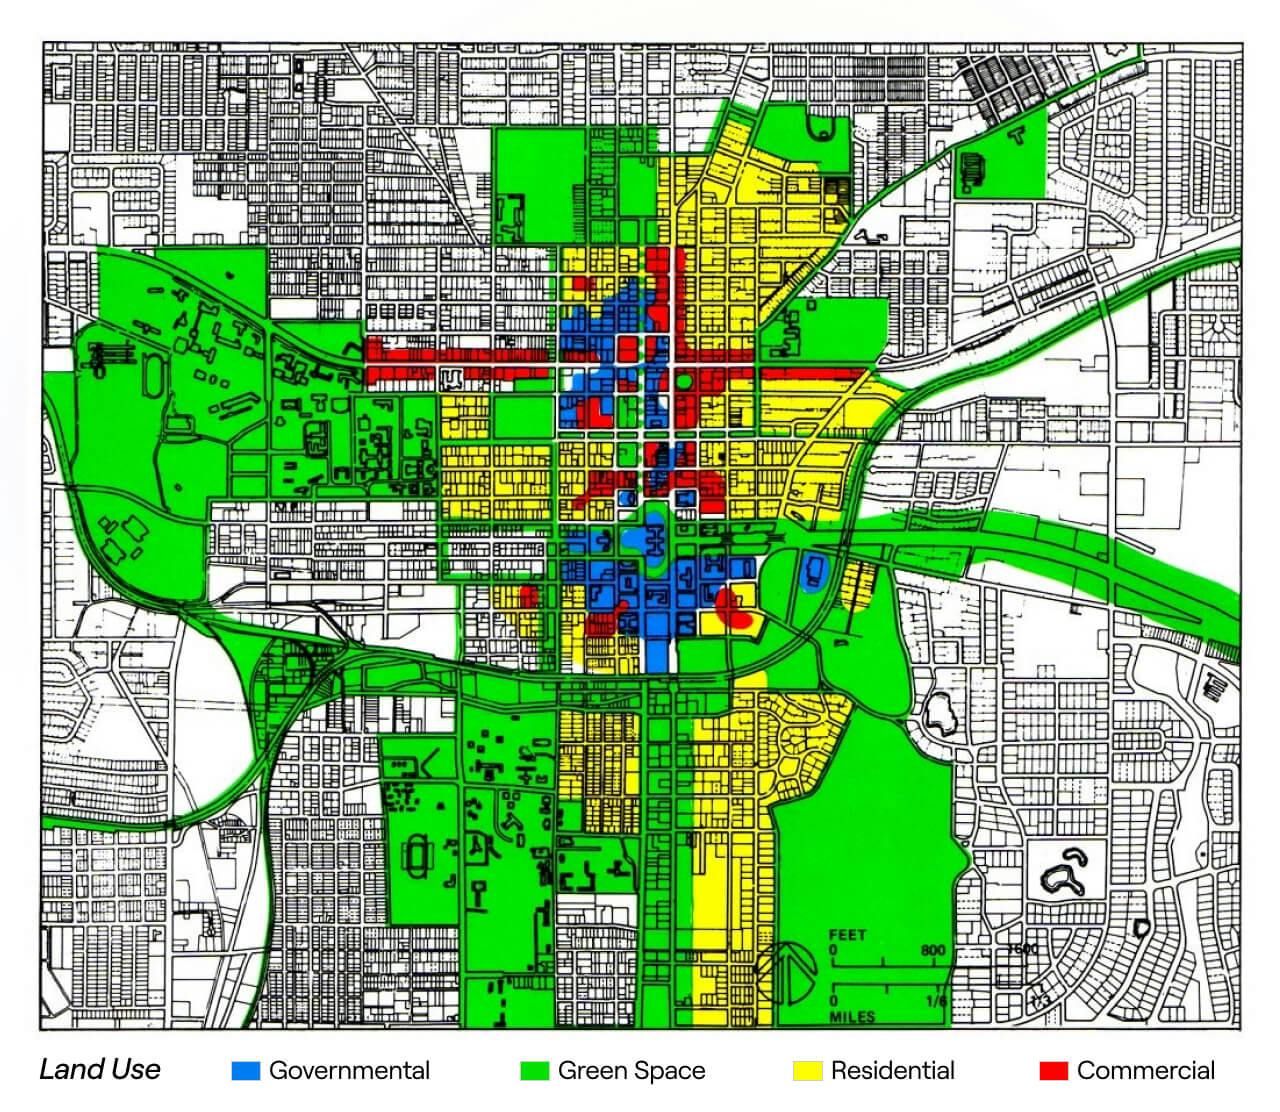 How will we zone digital cities? Example Land Use Map: Tallahassee Capitol Center, Urban Plan by Hisham N. Ashkouri for TAC. CC-BY-SA-2.5 (Cropped)